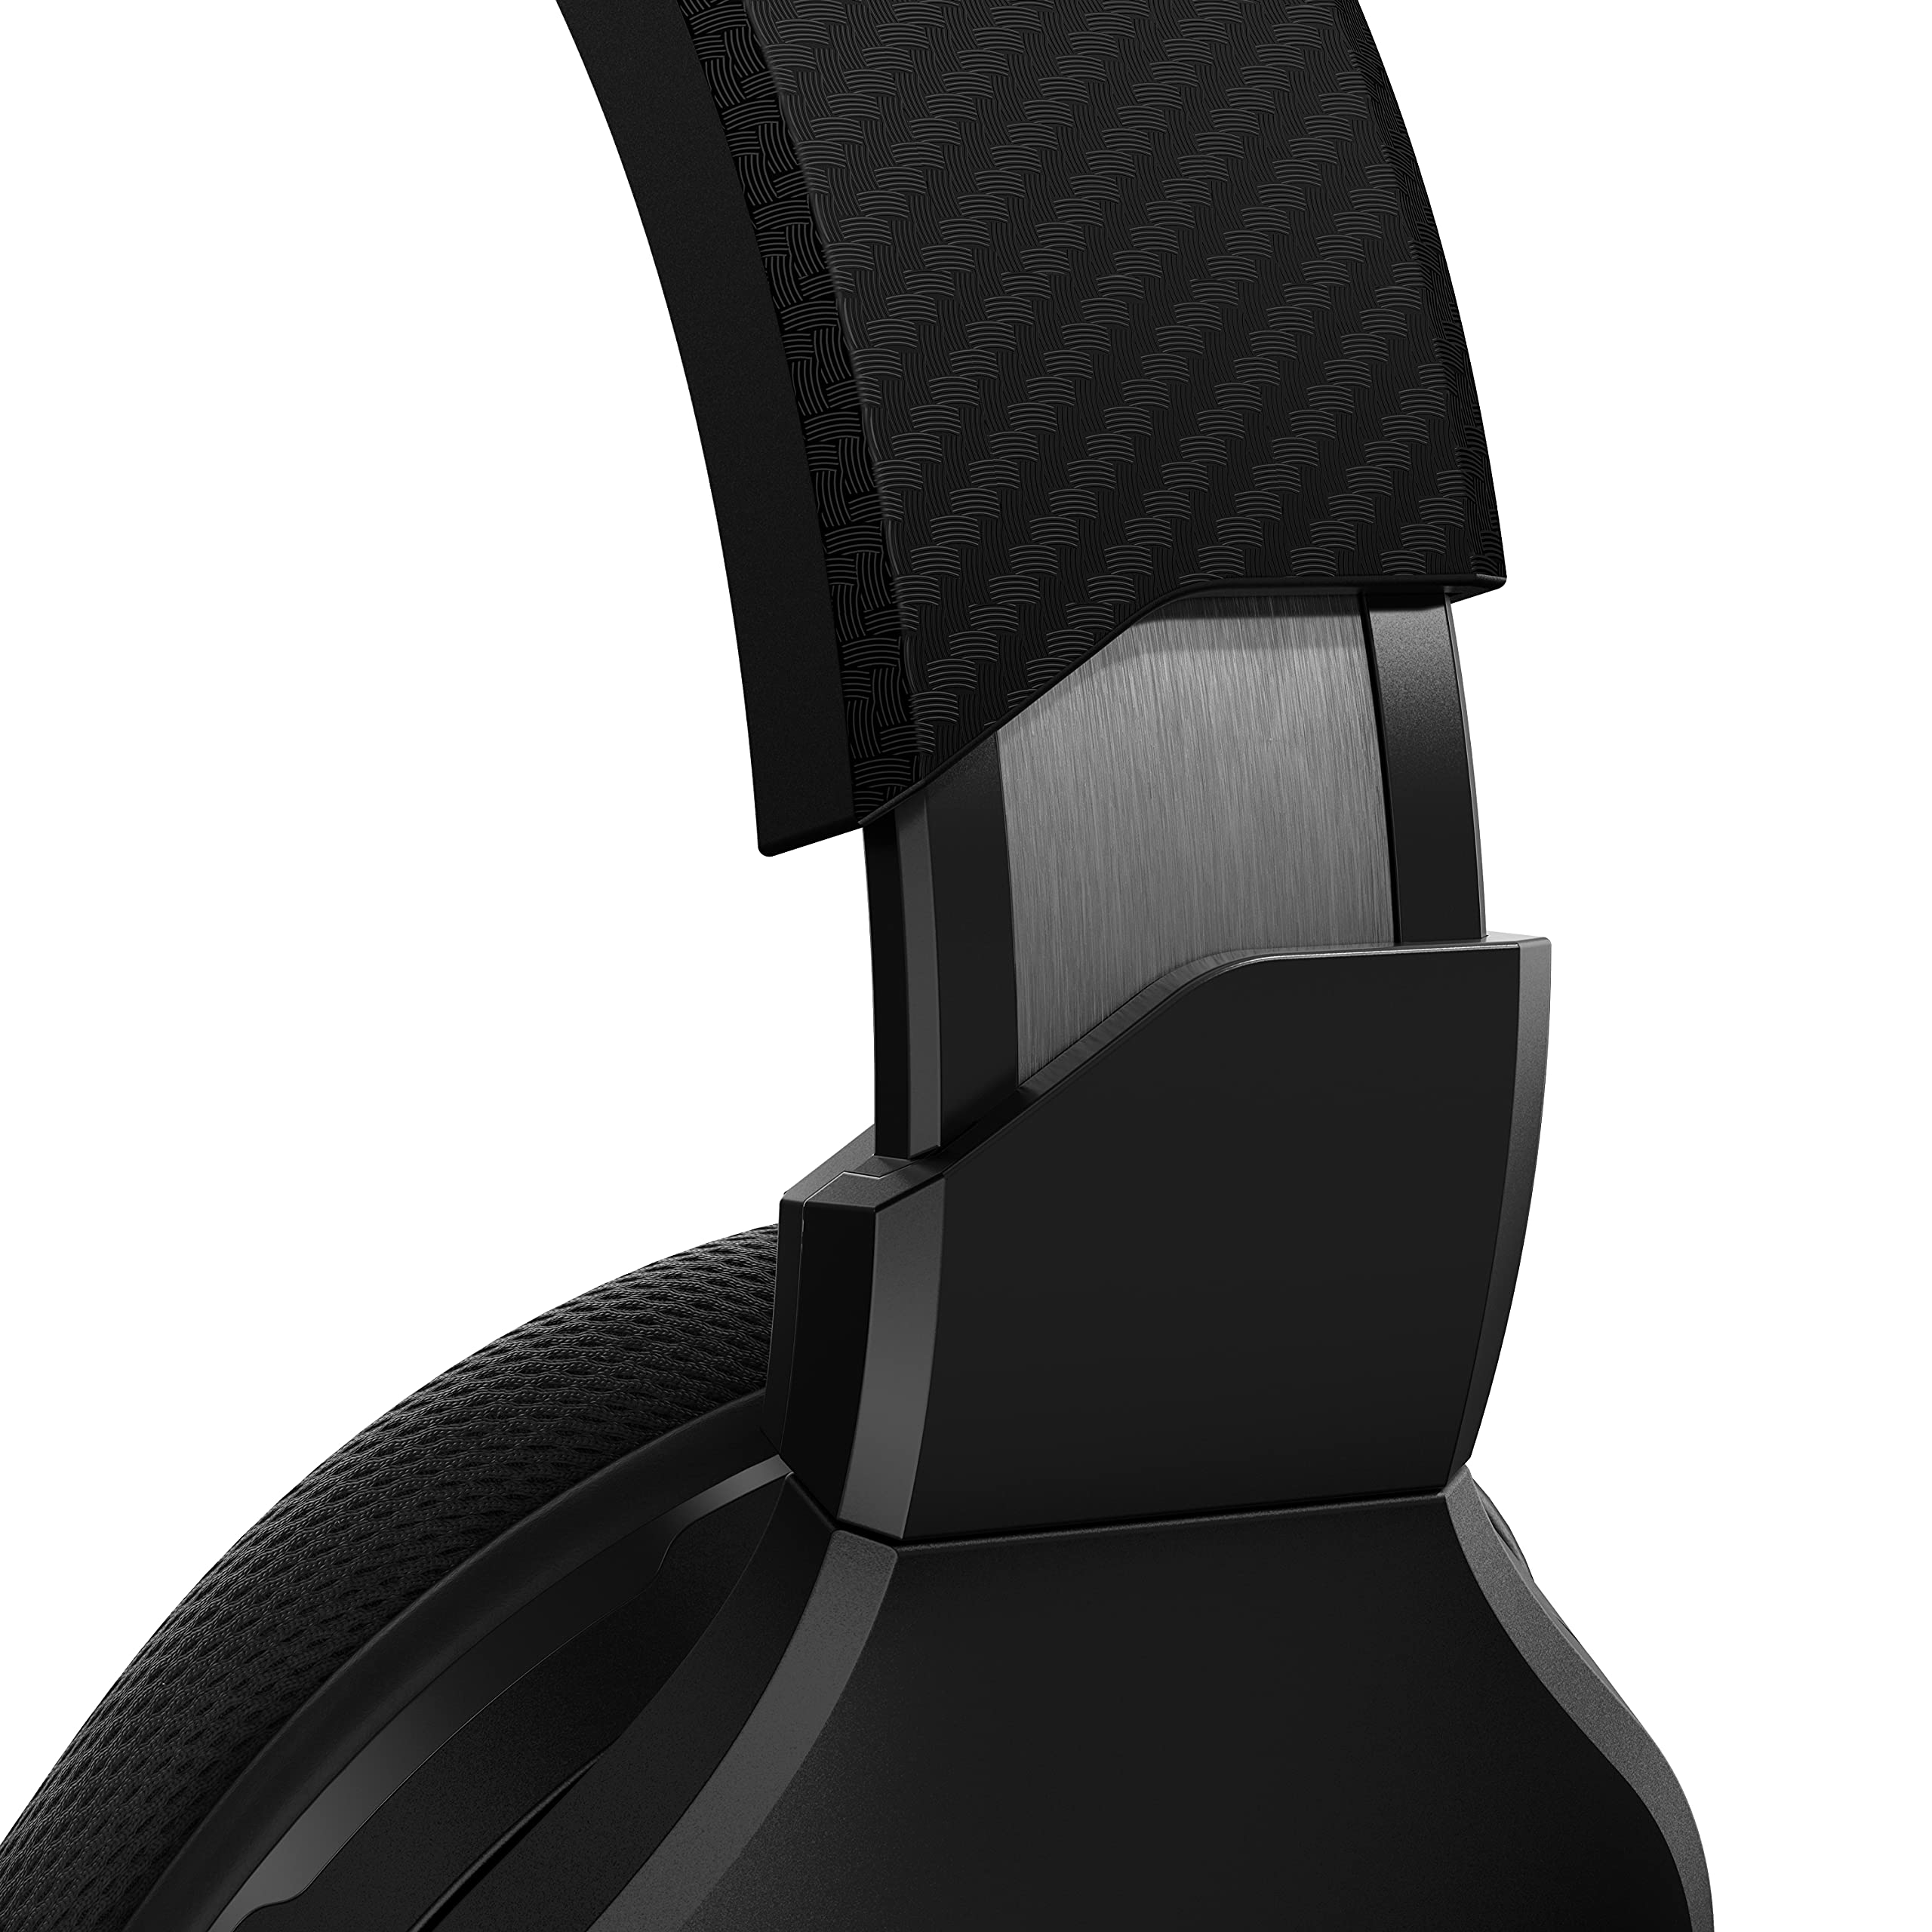 Turtle Beach Recon 200 Gen 2 Amplified Gaming Headset - PS4, PS5, Xbox Series X|S | One, Nintendo Switch & PC